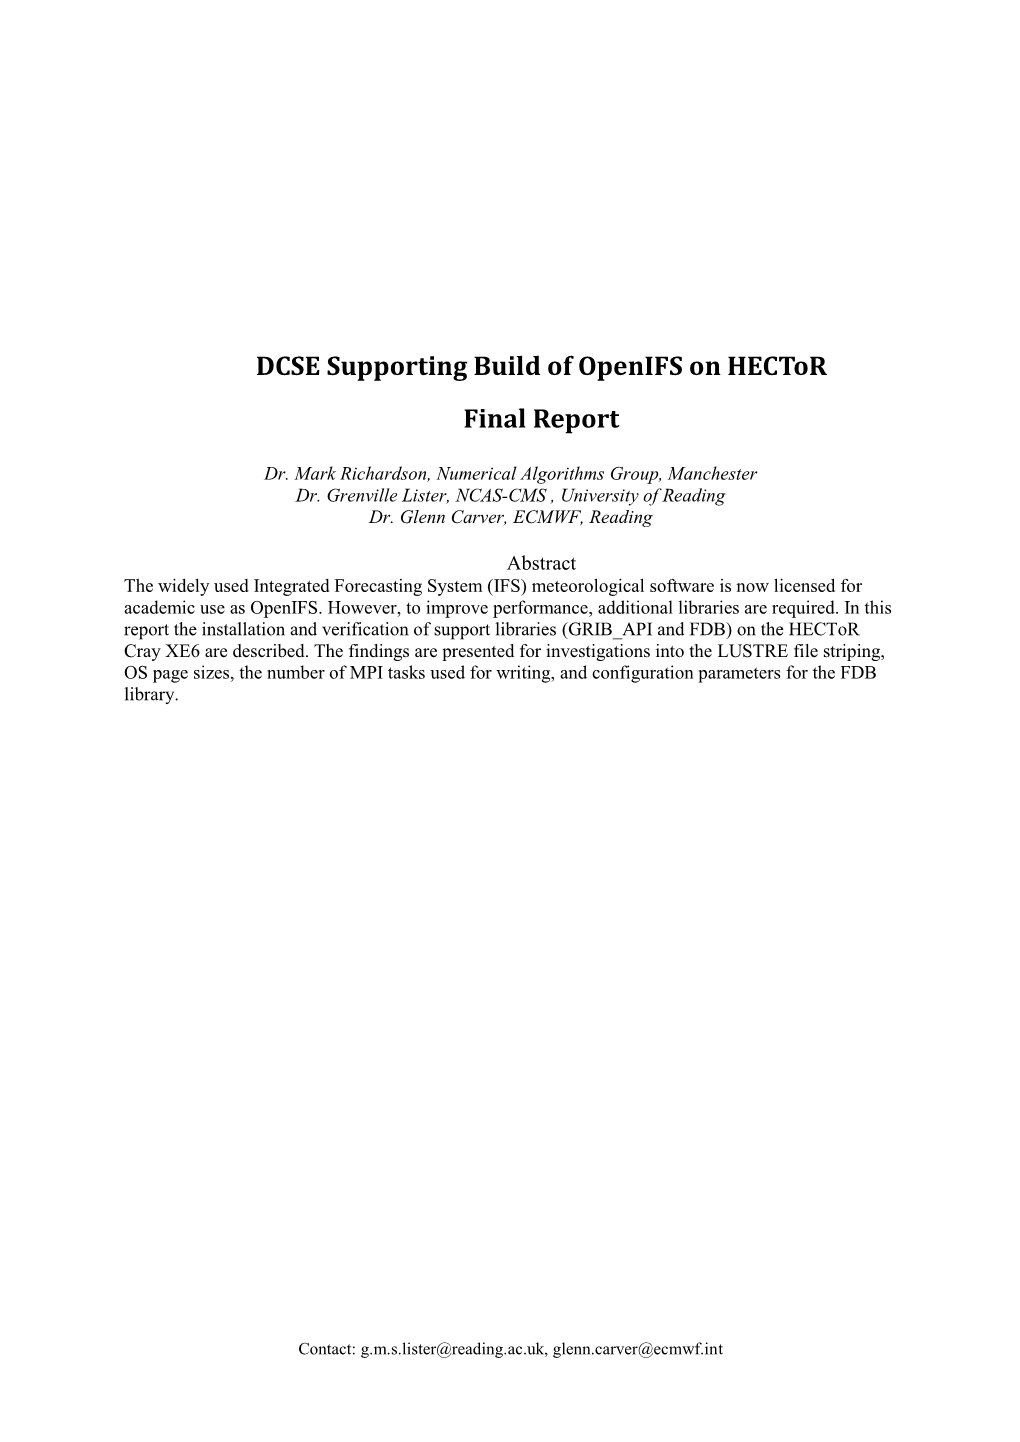 DCSE Supporting Build of Openifs on Hector Final Report